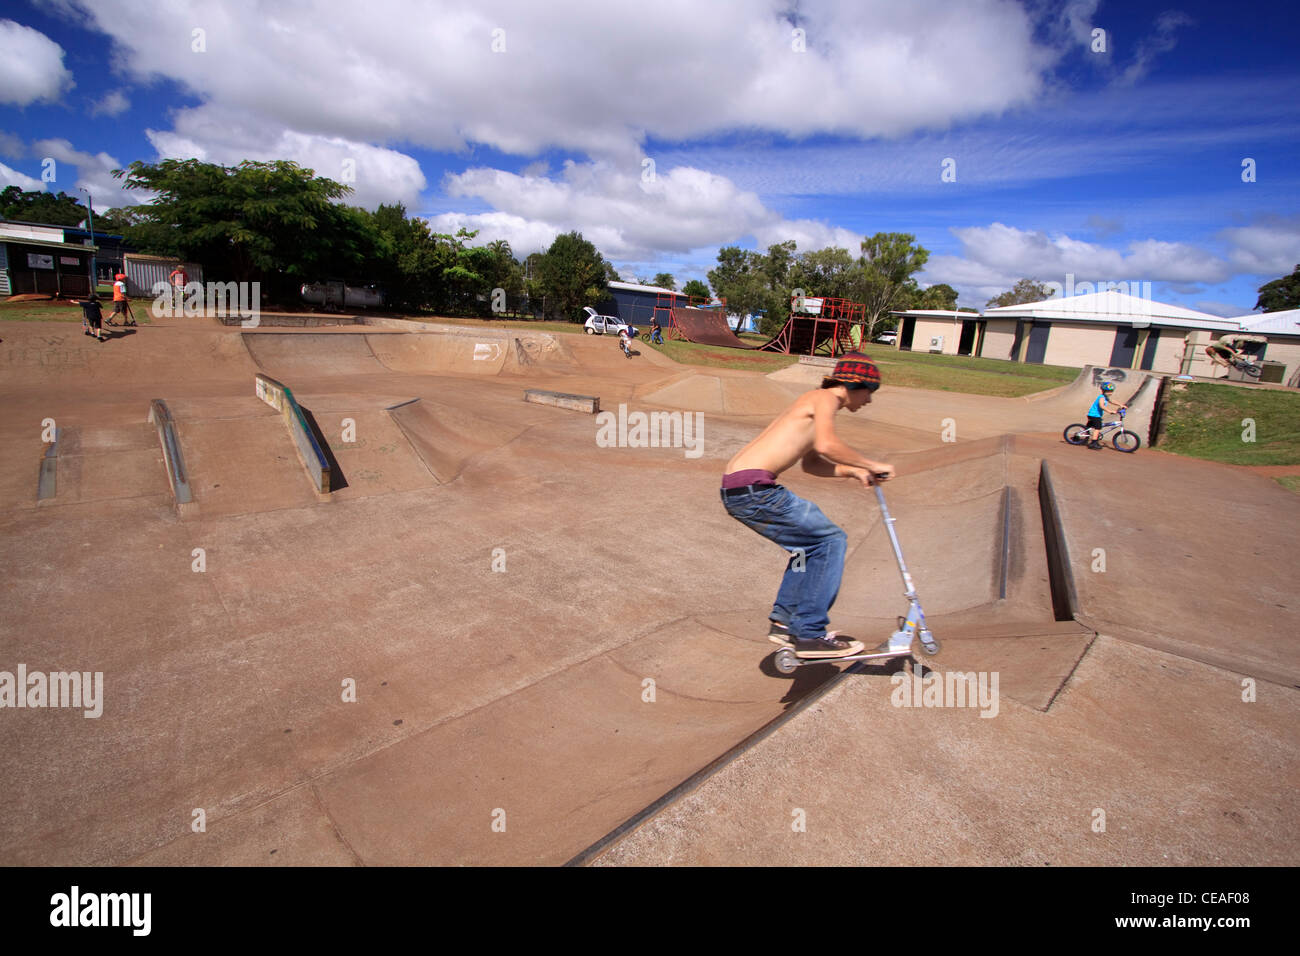 The Atherton skate park, on the Atherton Tablelands in far north Queensland, Australia is a popular place for local skaters Stock Photo